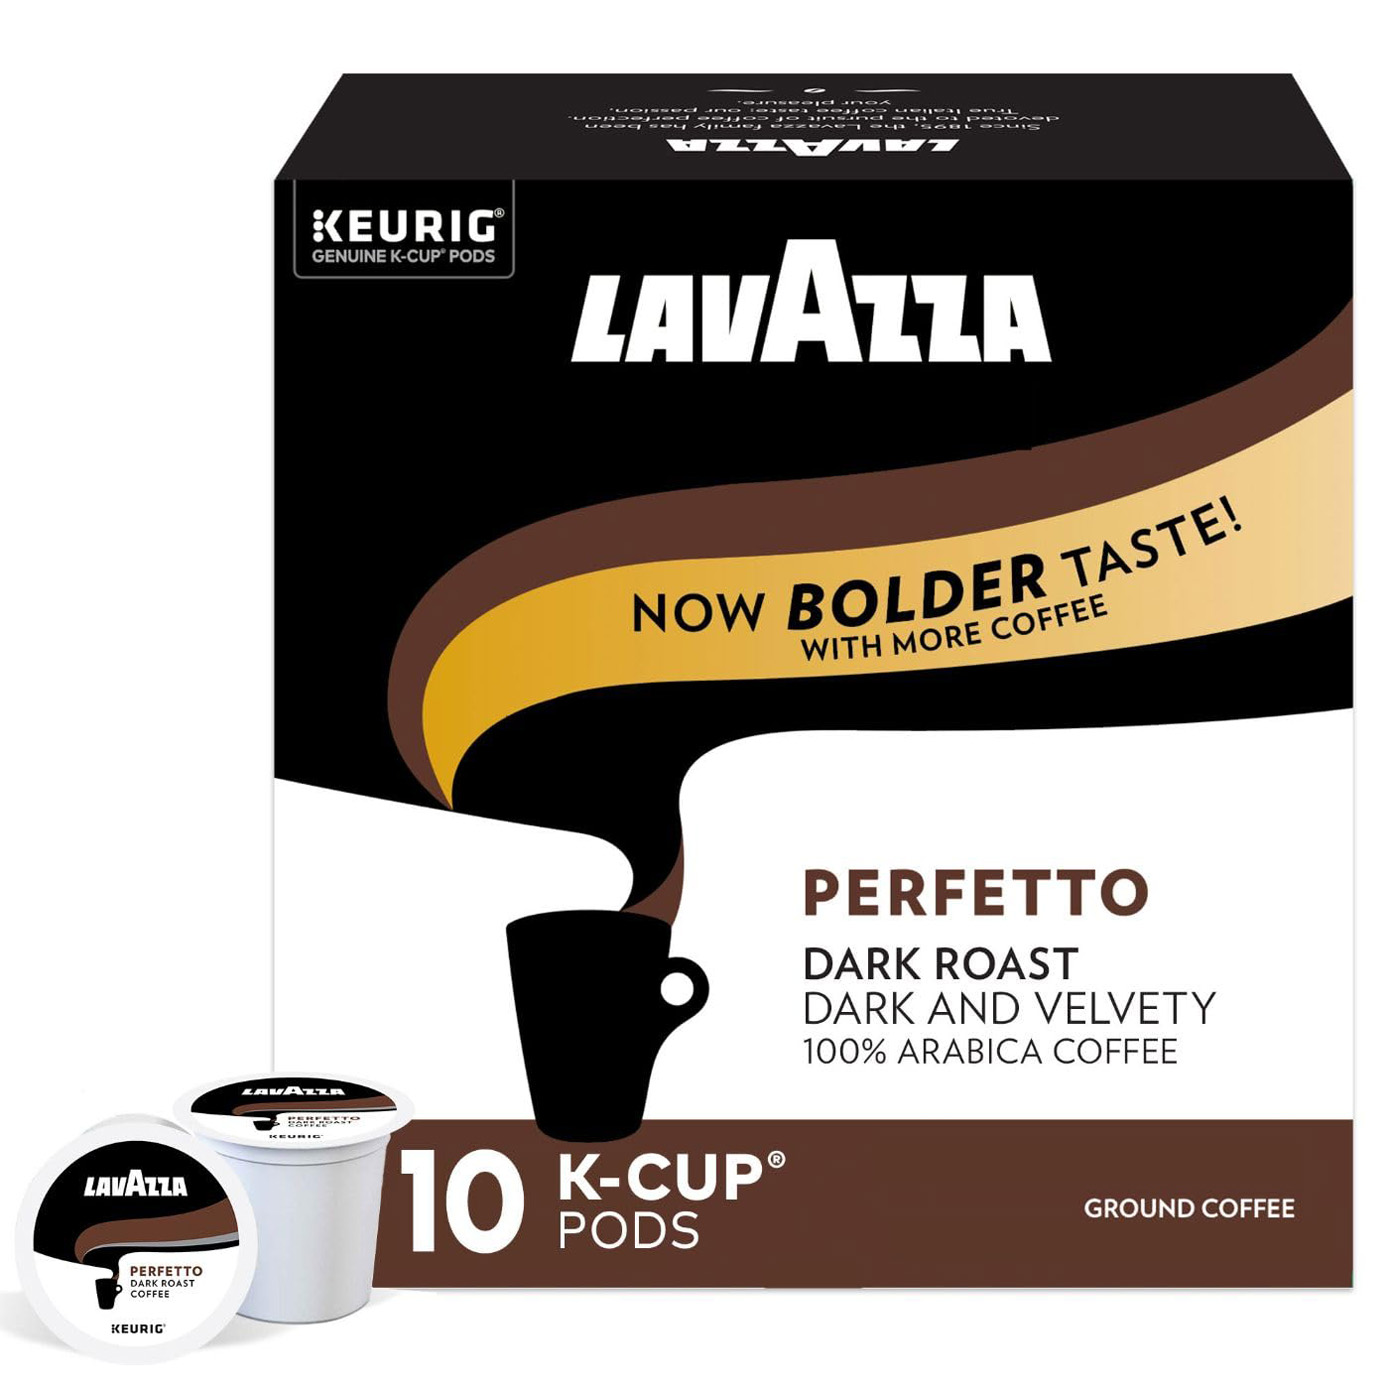 Lavazza Perfetto Single-Serve Coffee K-Cup Pods for Keurig Brewer Perfetto, Dark and Velvety Roast, 10-Count Boxes (Pack of 6)